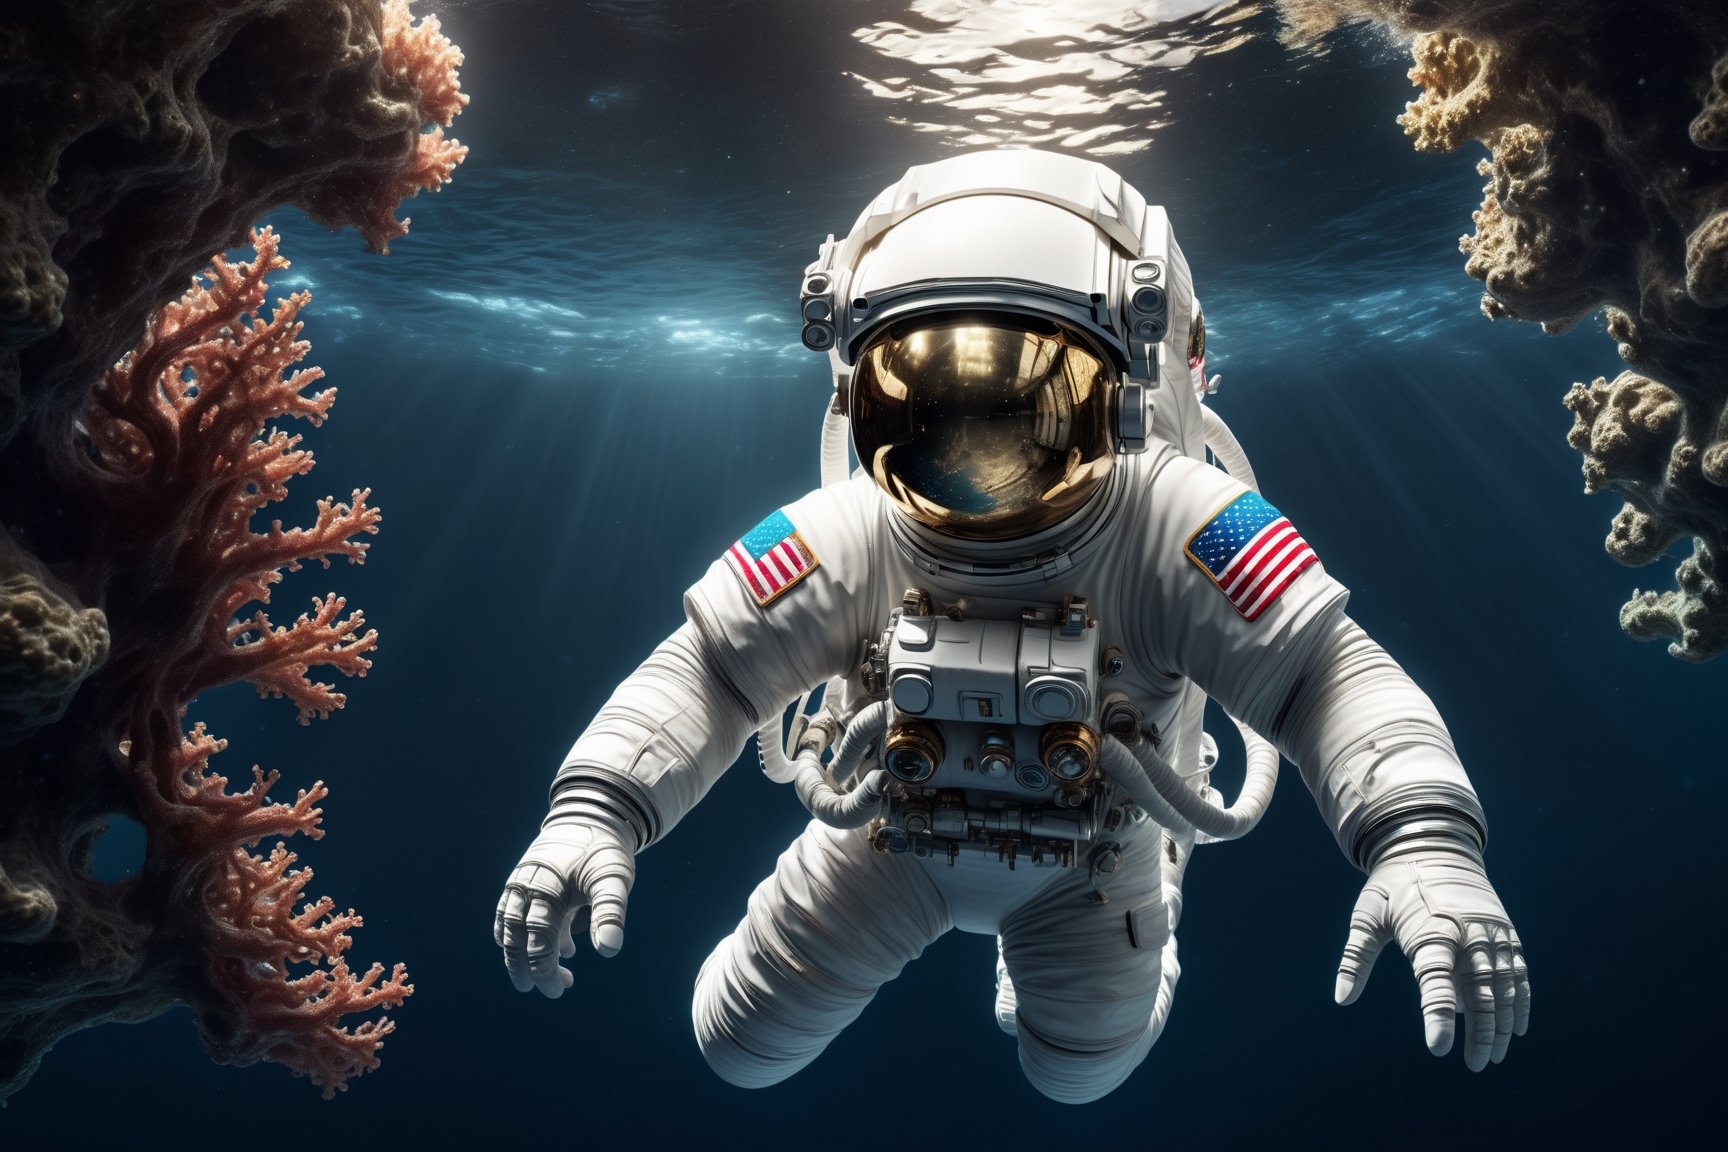 surreal photography High-definition photorealistic rendering of an astronaut in the intricately luxurious depths of the sea.